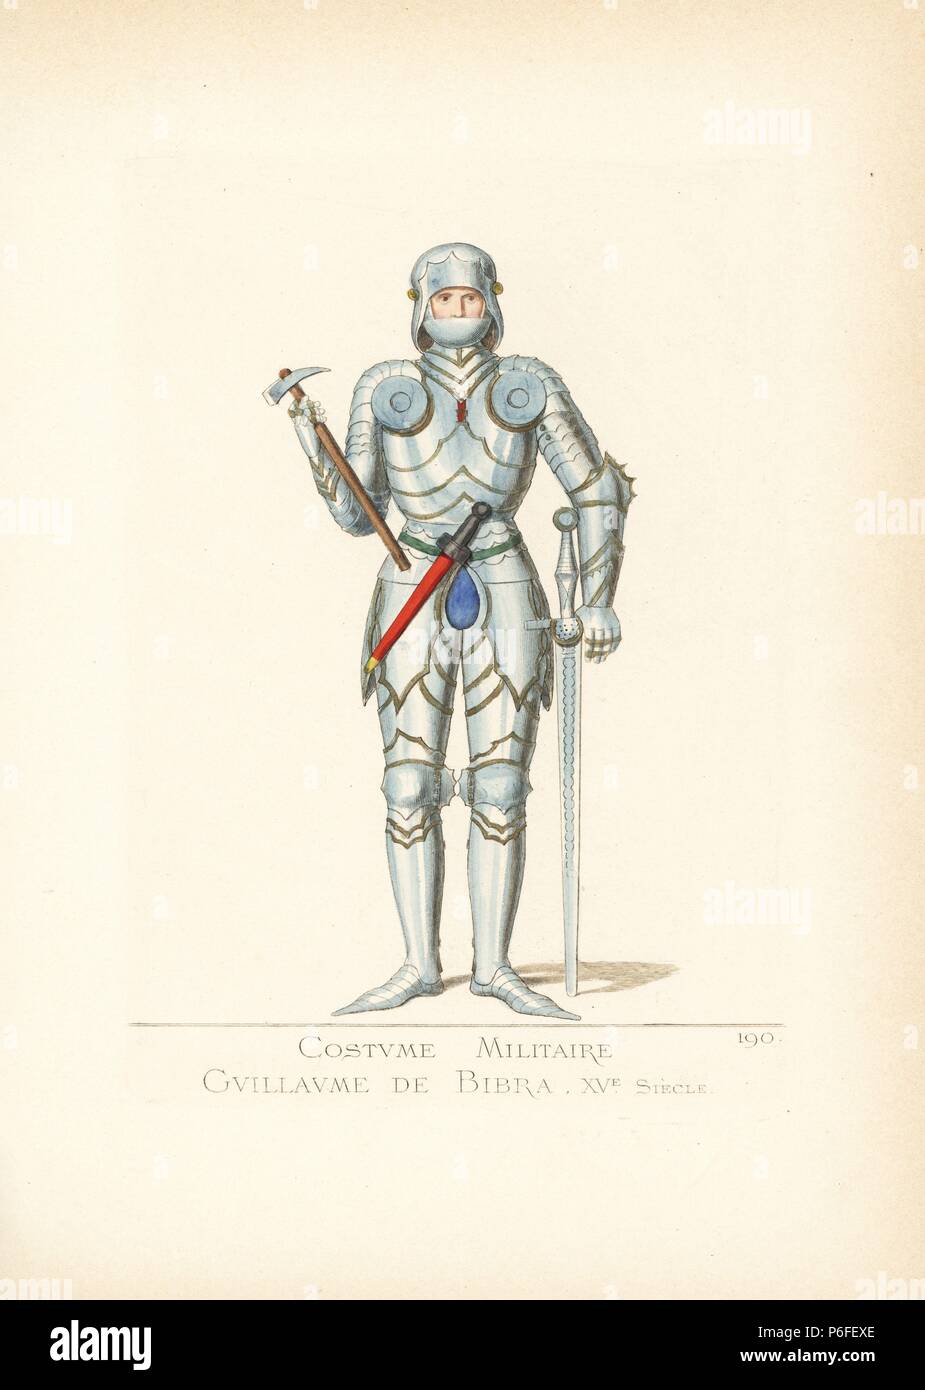 German knight in armour, 15th century. He wears a steel helmet with gold details, a suit of plate armour in steel with gold joints, green belt, articulated gauntlets and shoes. He is armed with sword, dagger and battle axe. From the tomb of Wilhelm von Bibra, ambassador to HRE Frederick III, in the church of Saint Anastasia, Verona. Handcoloured illustration drawn and lithographed by Paul Mercuri with text by Camille Bonnard from 'Historical Costumes from the 12th to 15th Centuries,' Levy Fils, Paris, 1861. Stock Photo